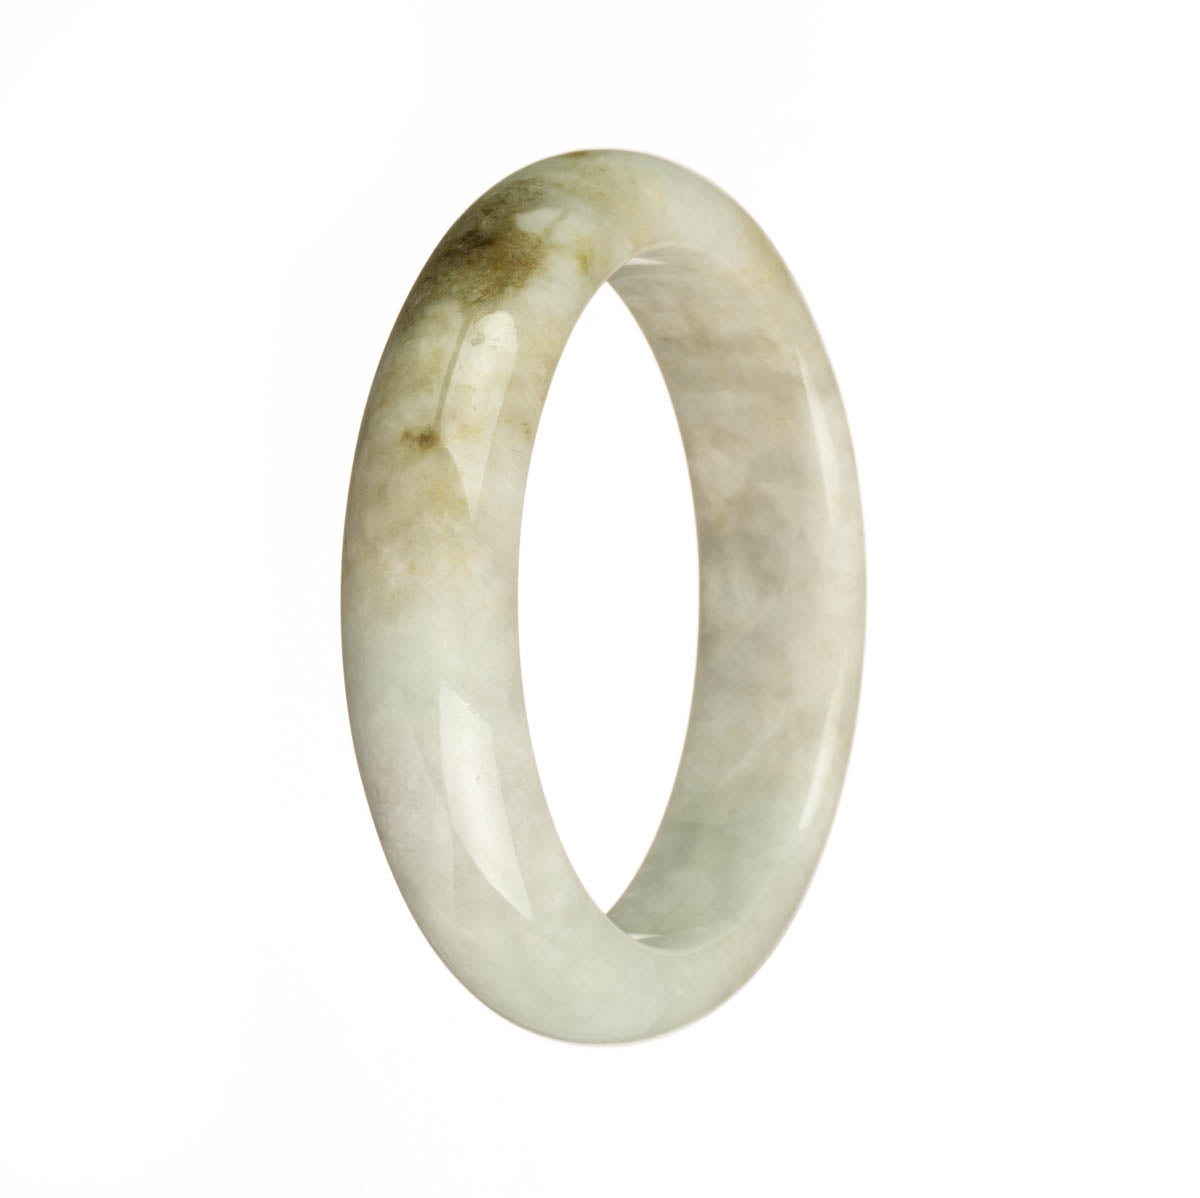 A close-up image of a jadeite bracelet, featuring a certified Grade A white jade with an olive green pattern. The bracelet is in the shape of a half moon and measures 55mm in size. It is a product of MAYS GEMS.